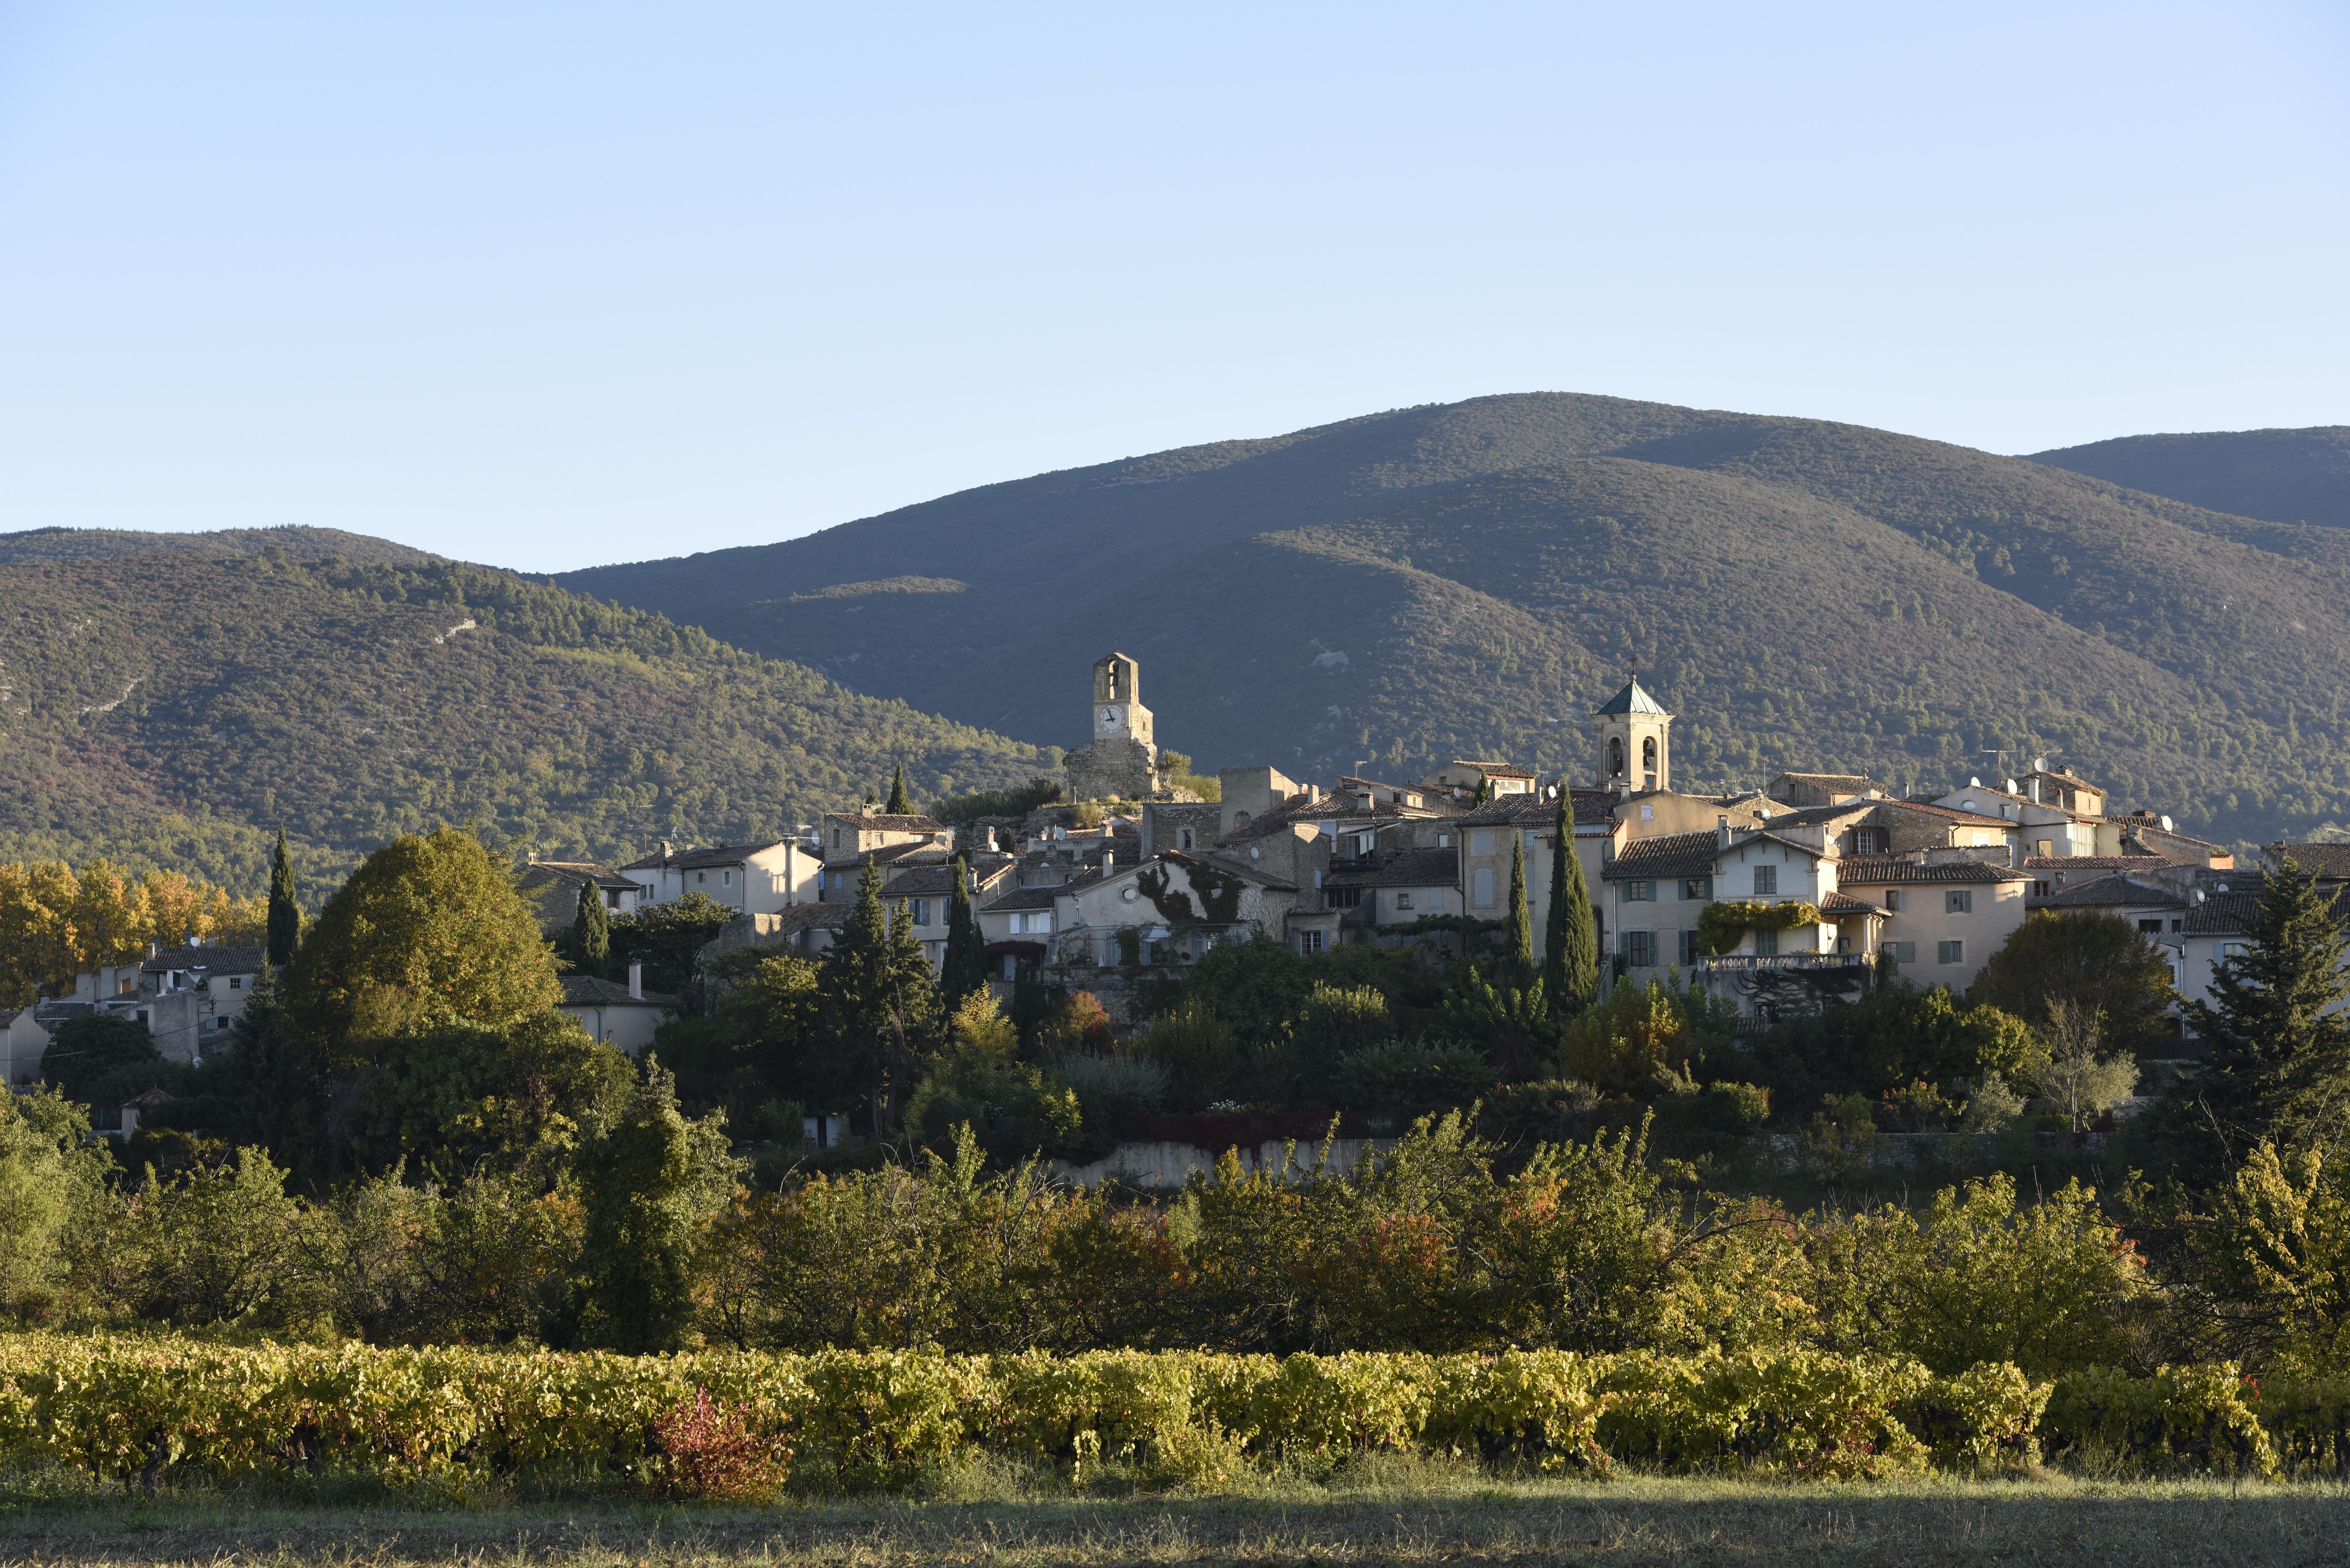 The village of Lourmarin, very close to La Cavale and considered one of the prettiest villages in France